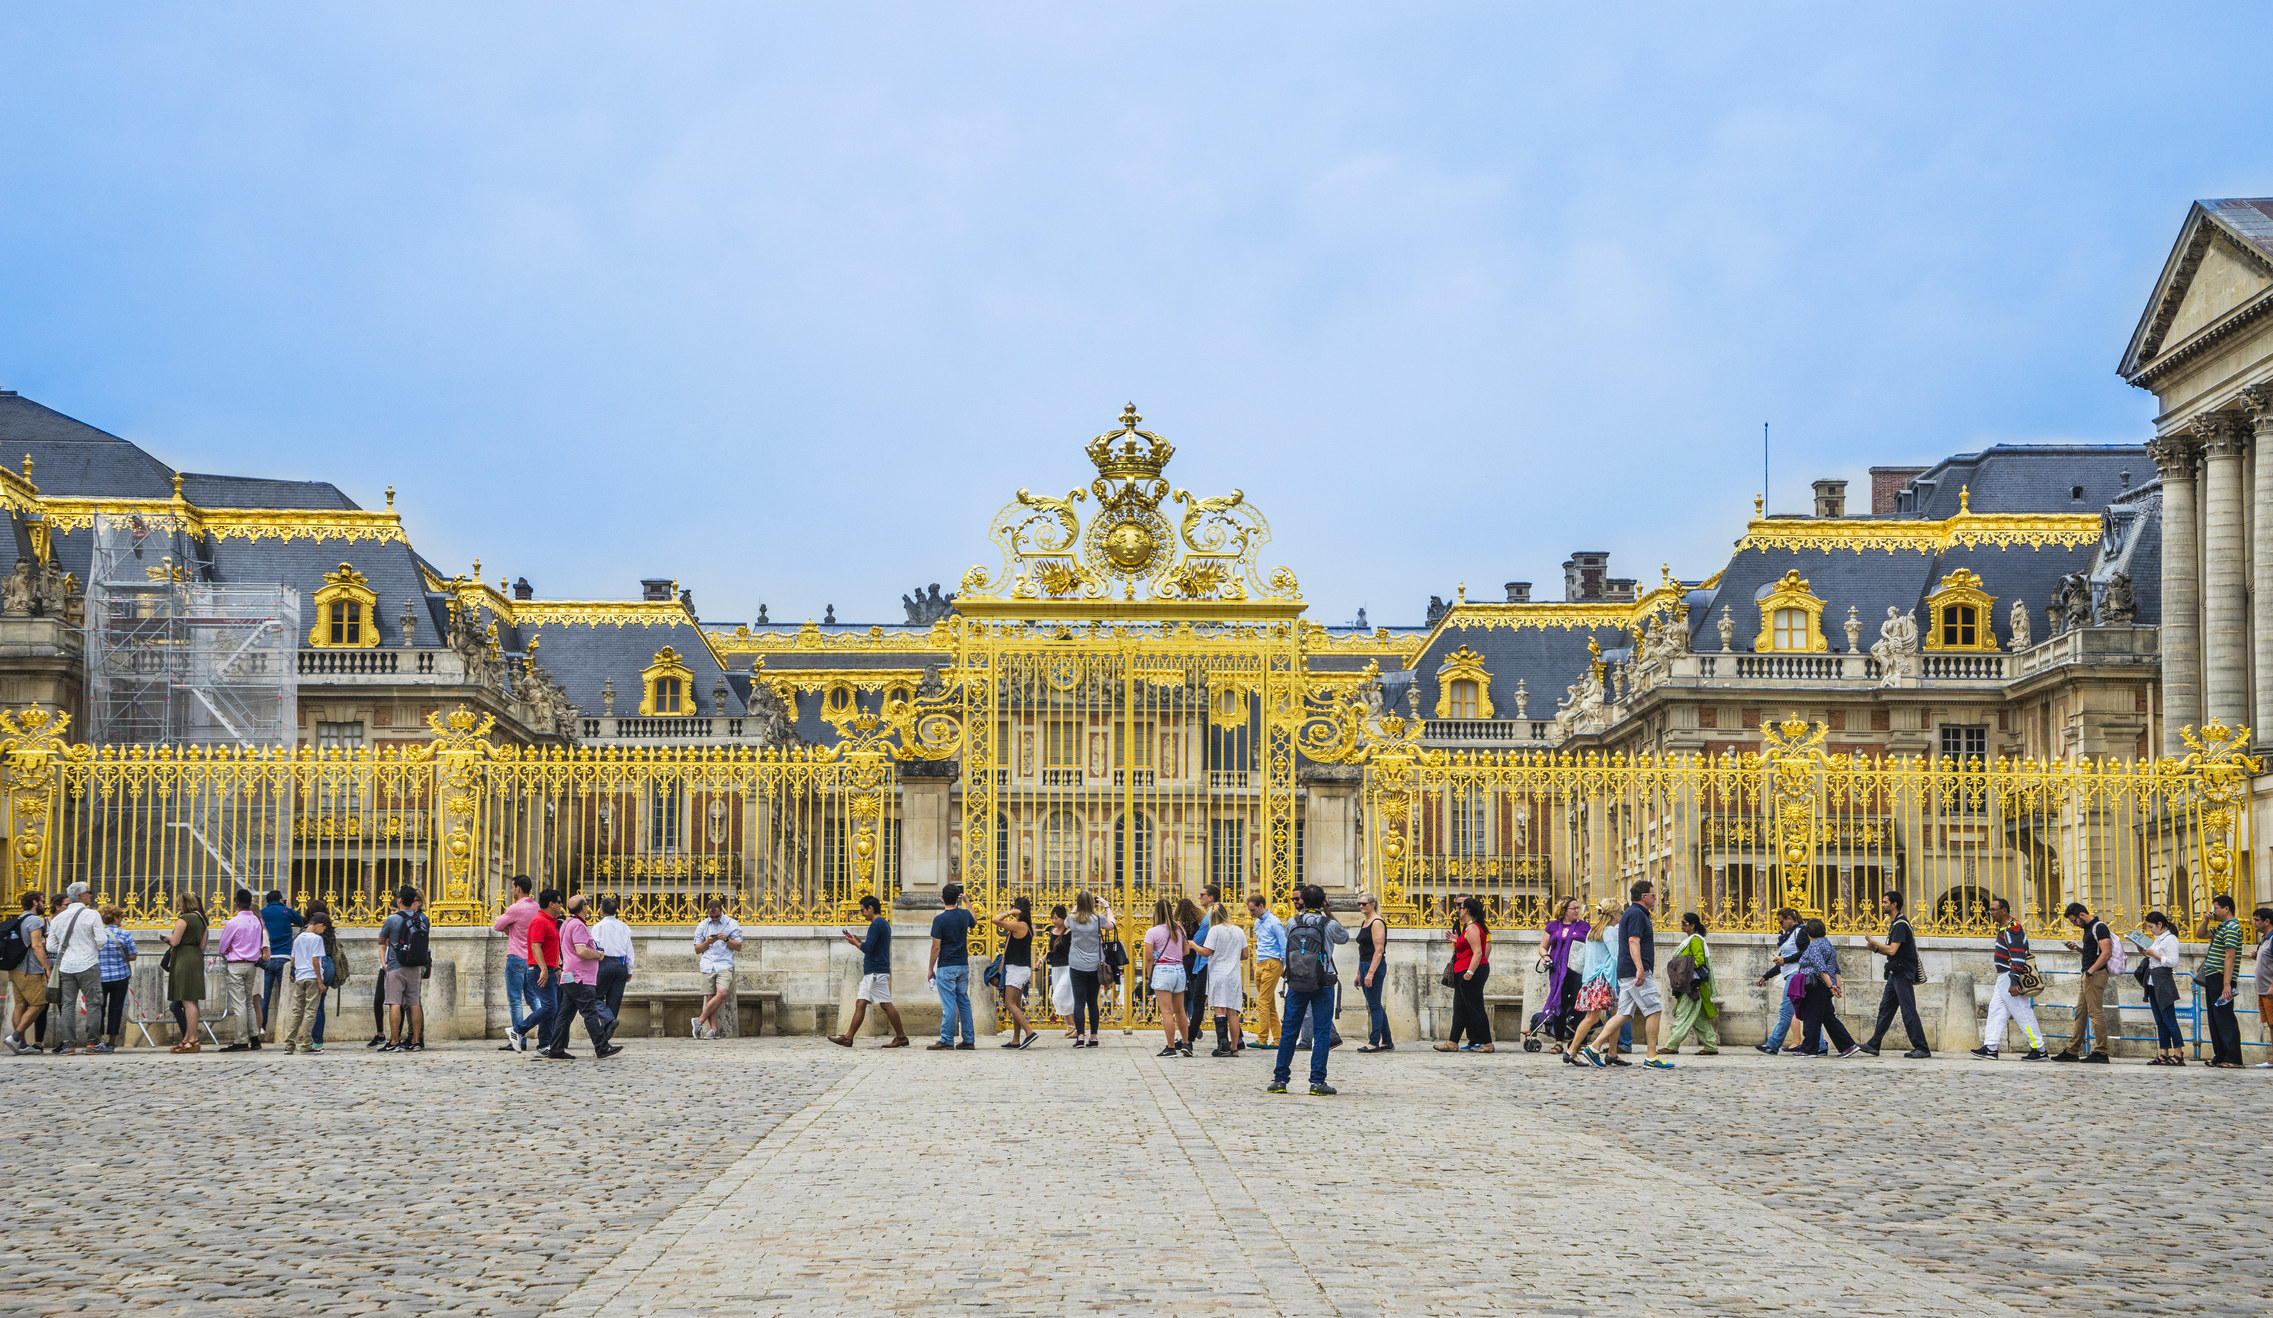 Tourists waiting in line at Versailles.